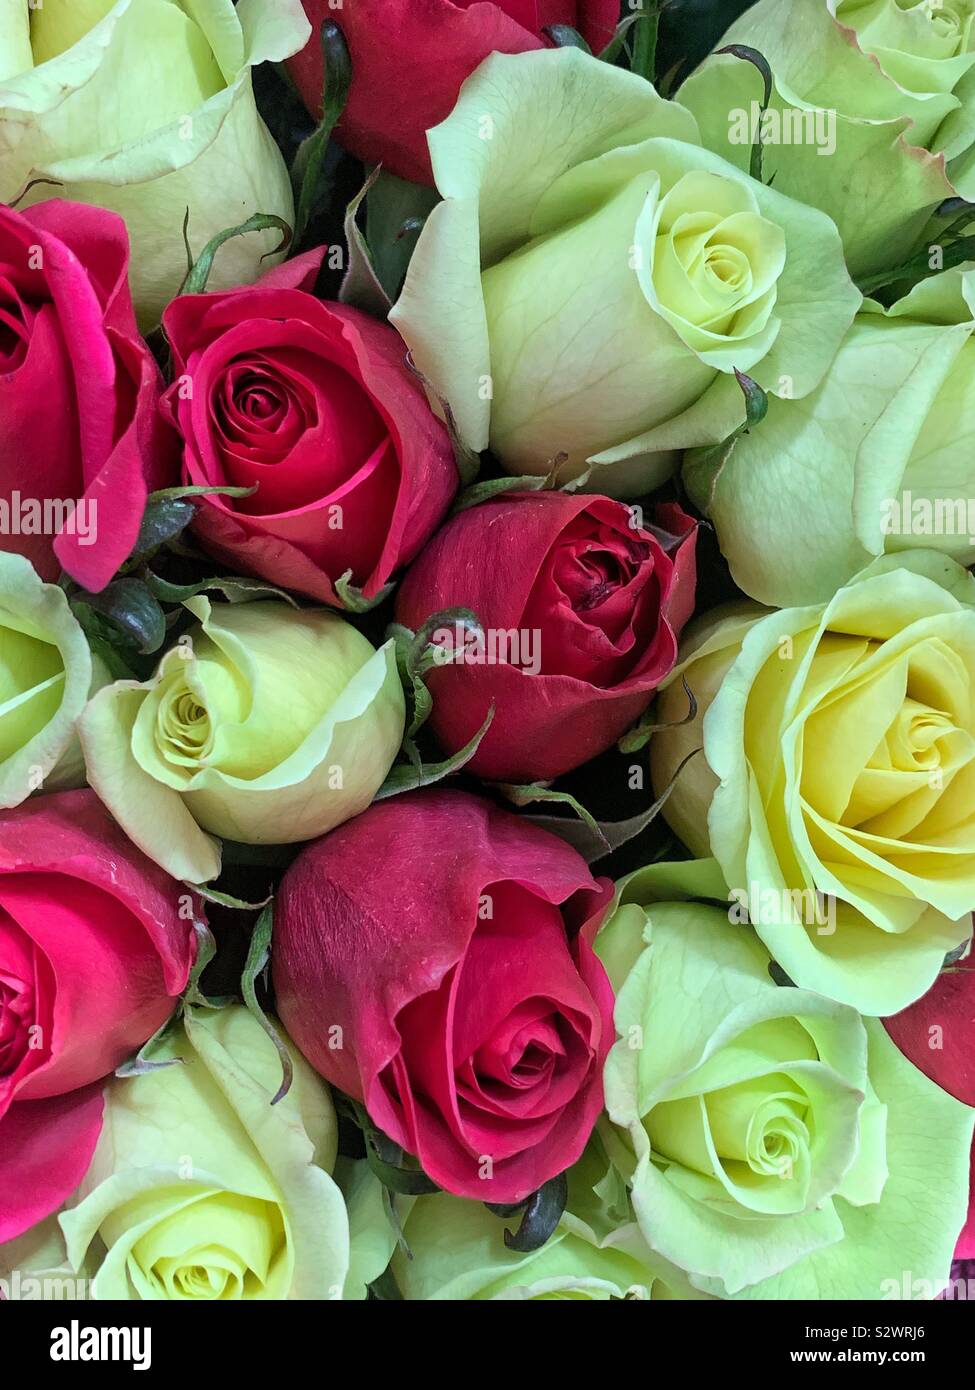 Beautiful bouquet of red and white roses. Stock Photo